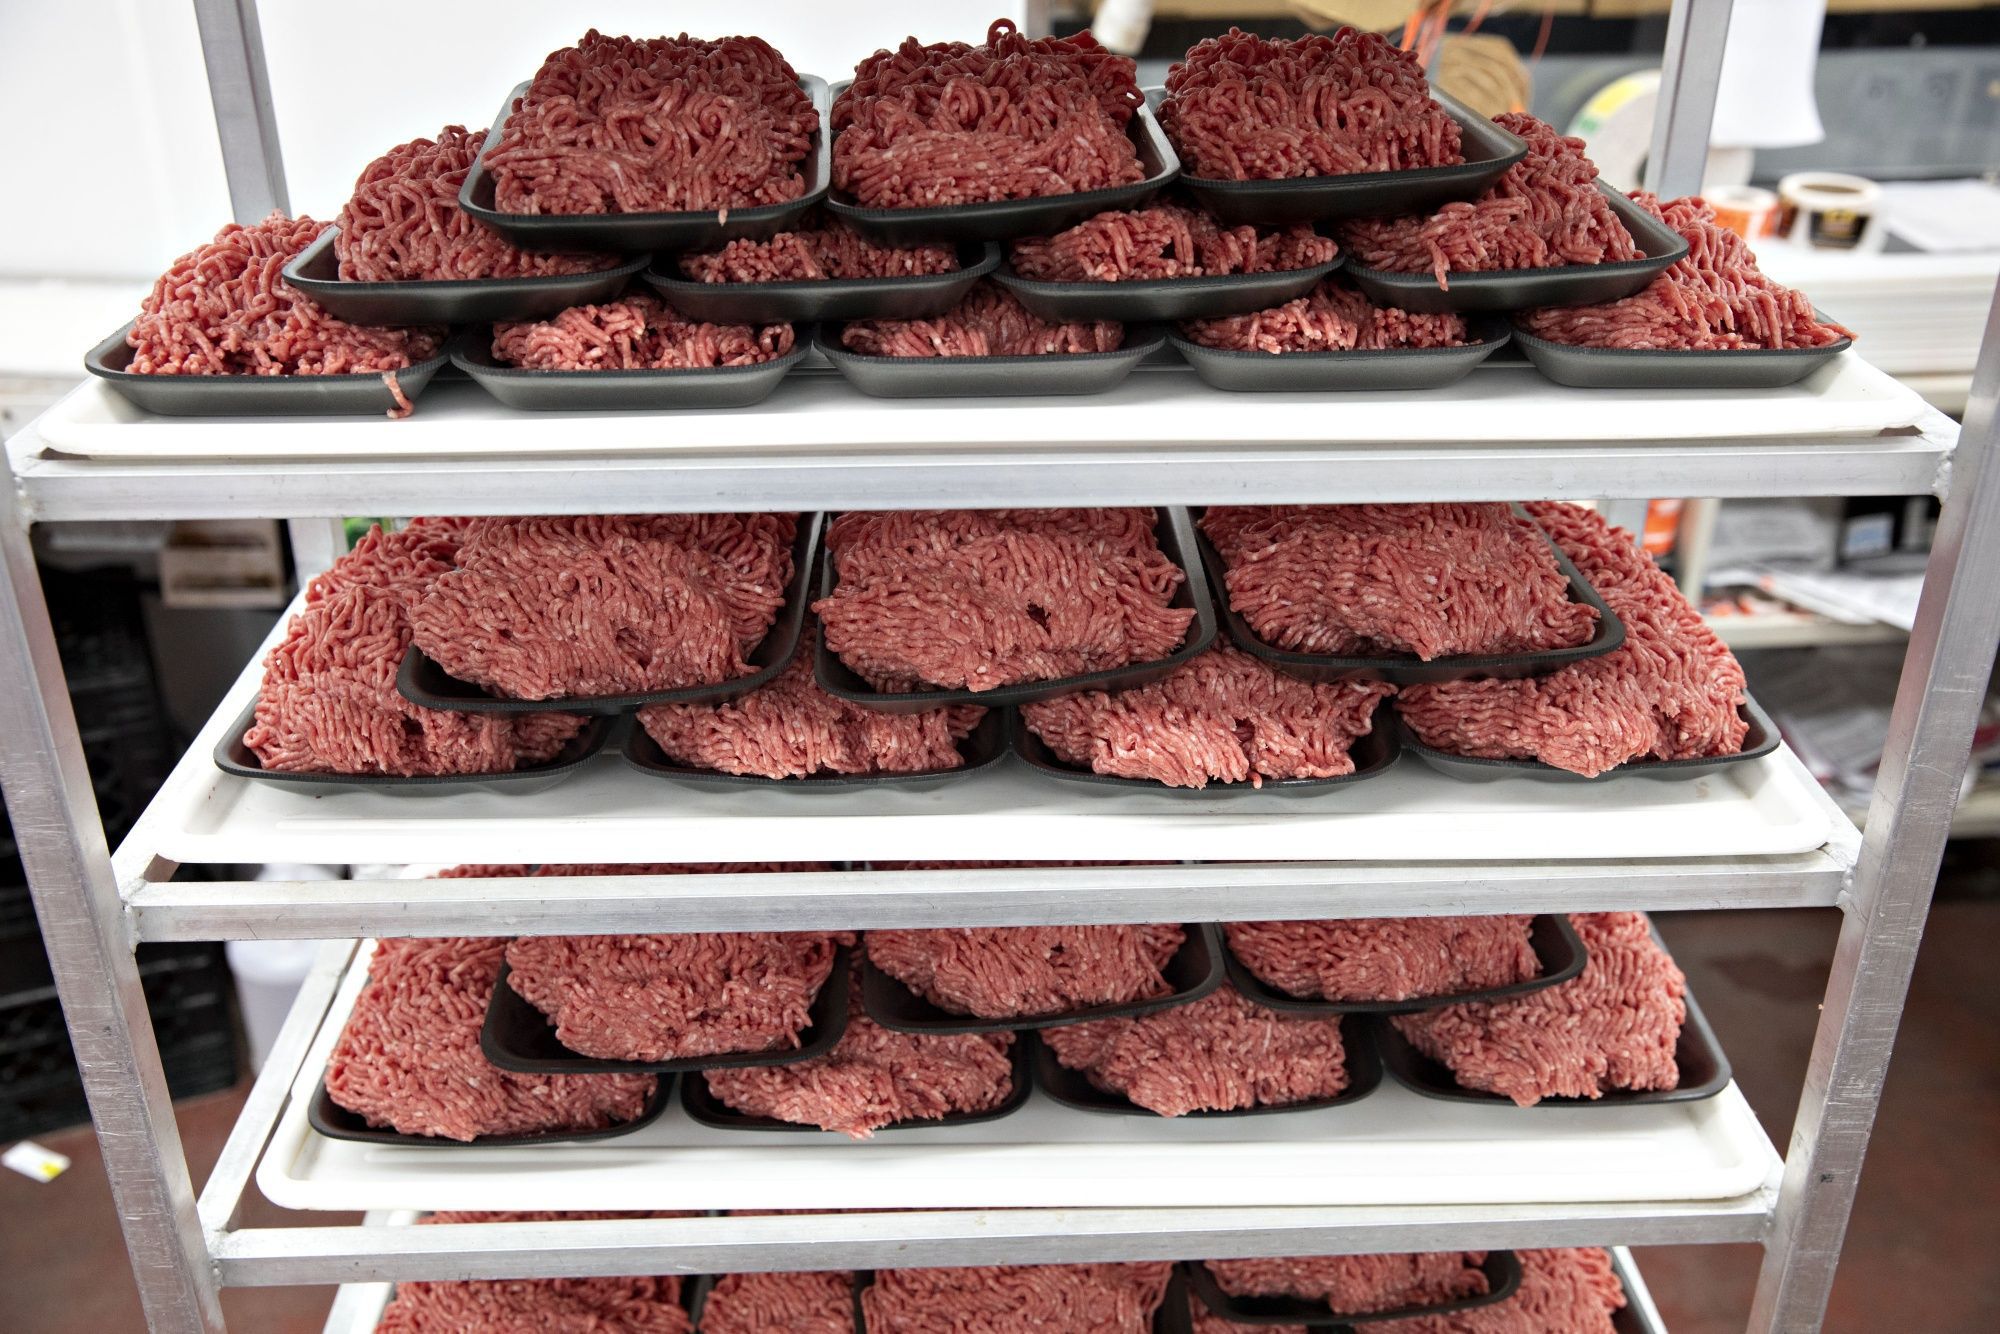 Over 120,000 pounds of ground beef recalled due to possible E.coli